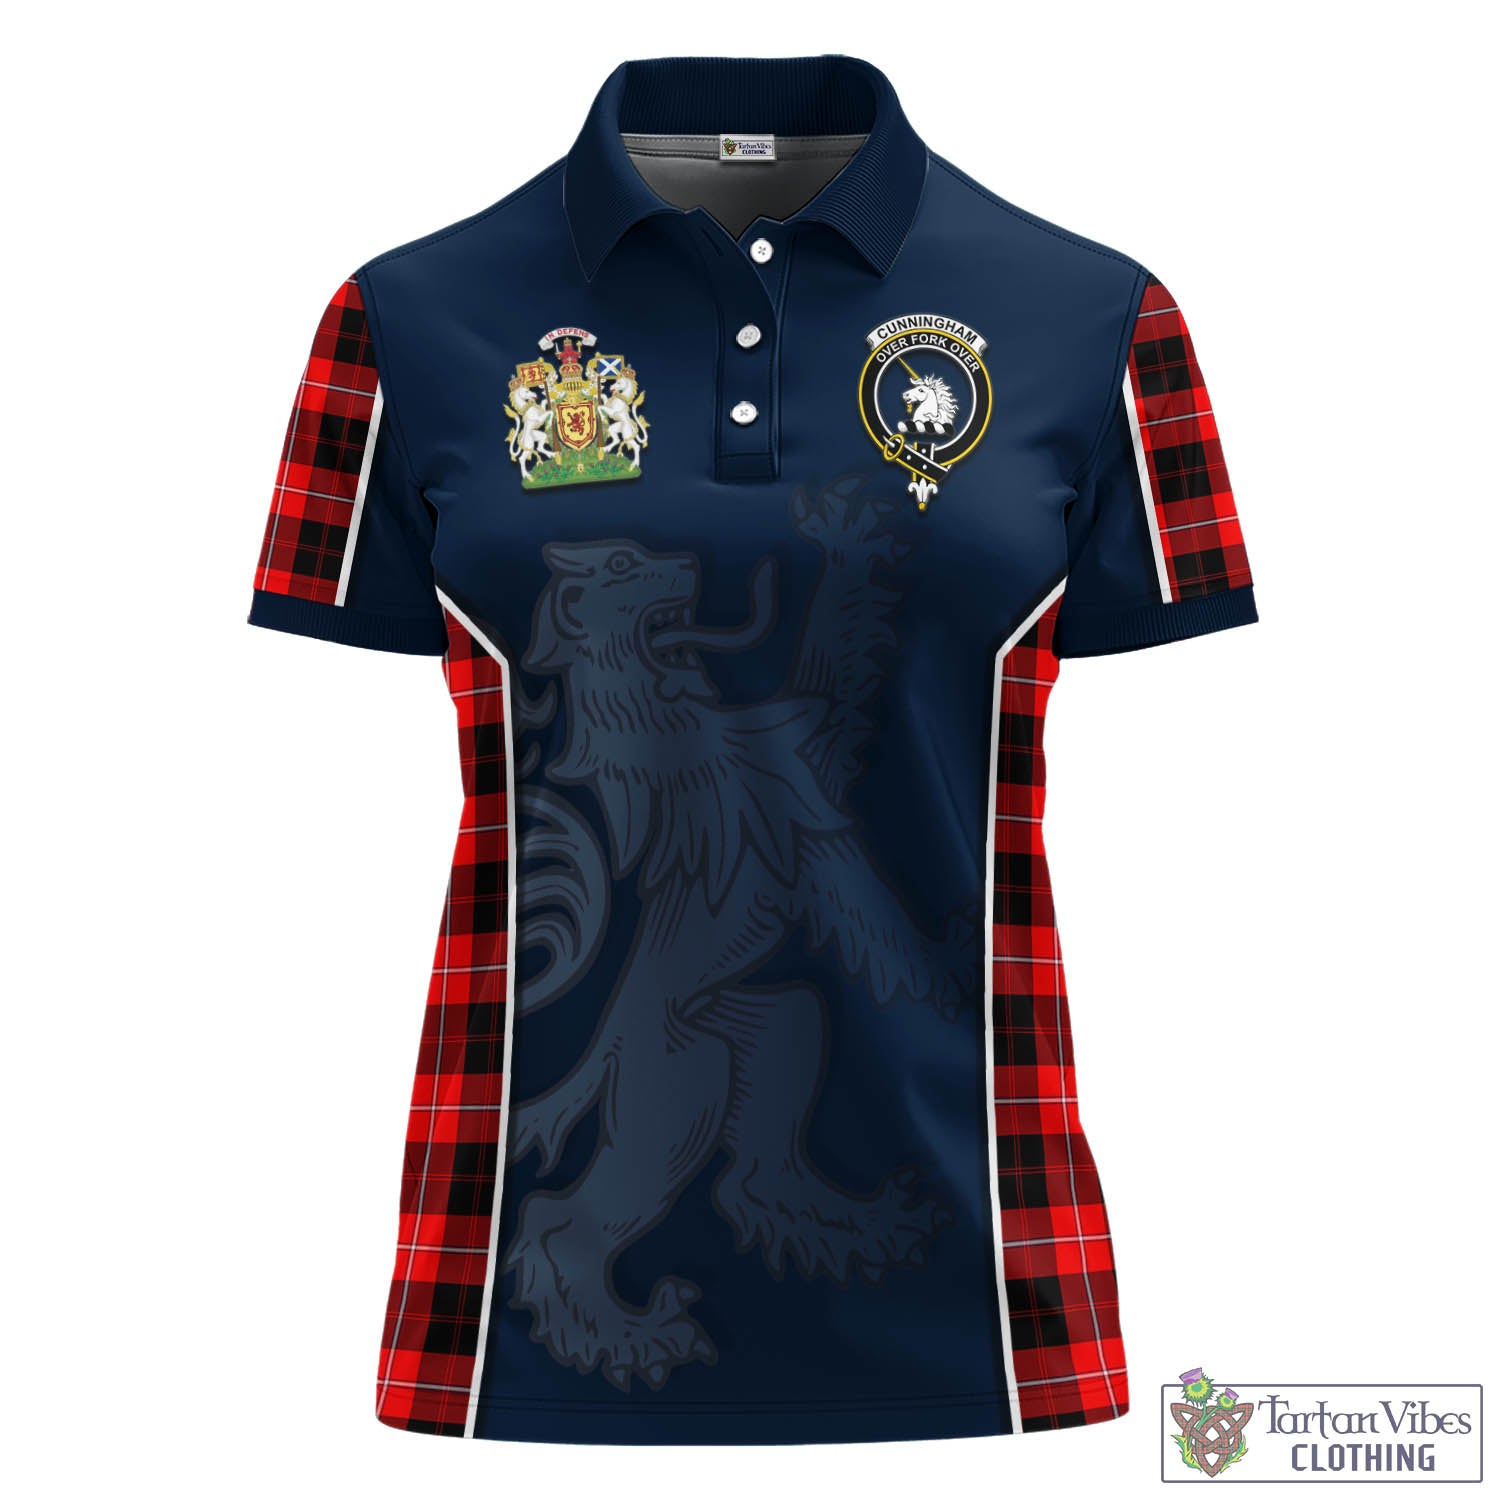 Tartan Vibes Clothing Cunningham Modern Tartan Women's Polo Shirt with Family Crest and Lion Rampant Vibes Sport Style